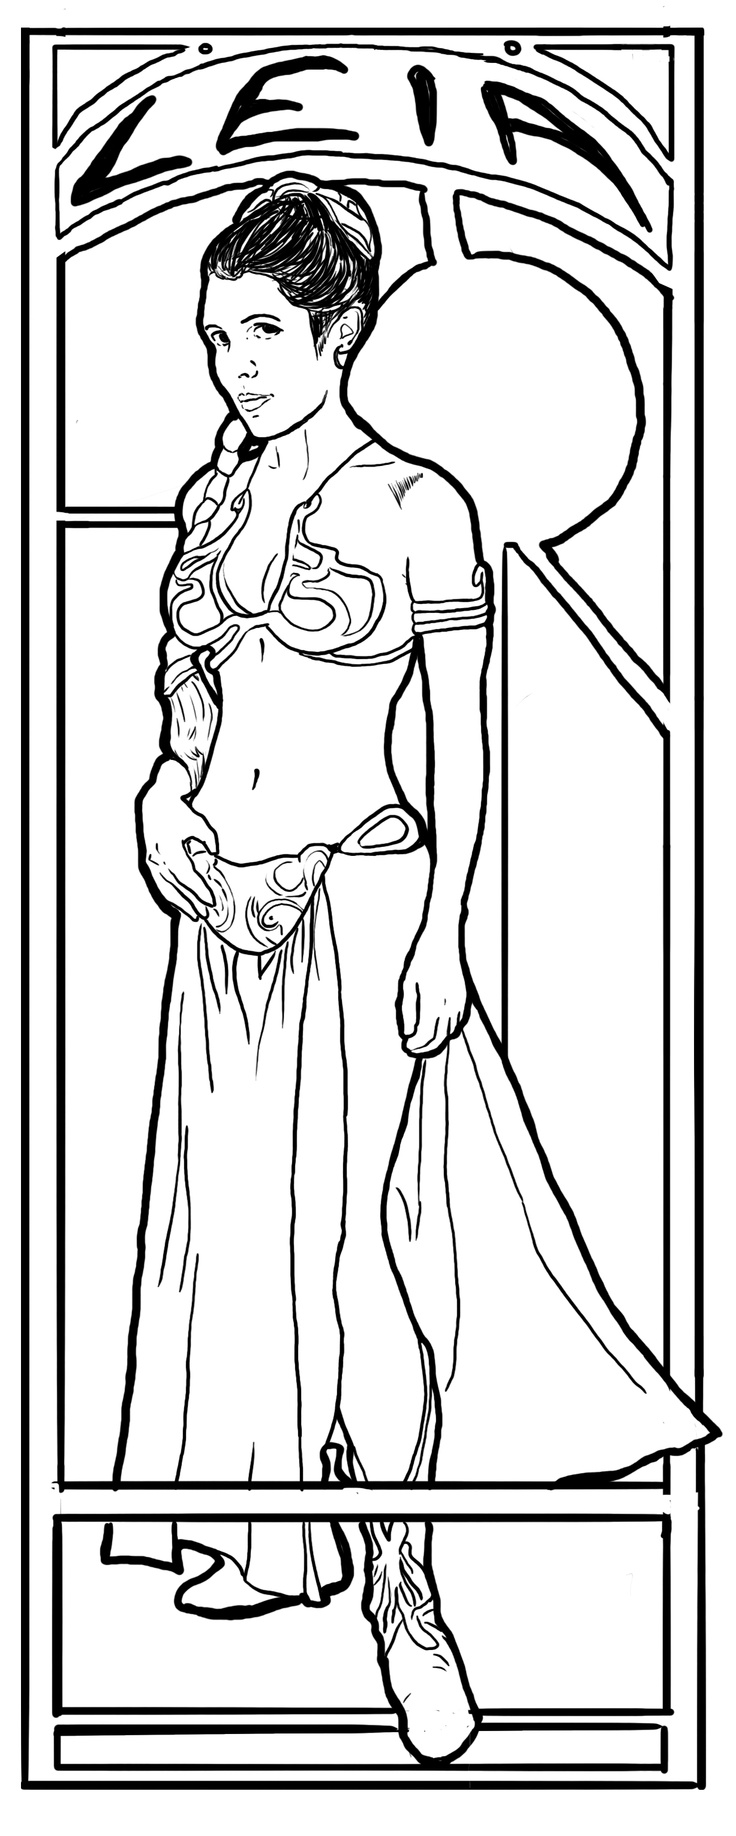 Princess Leia Coloring Pages.